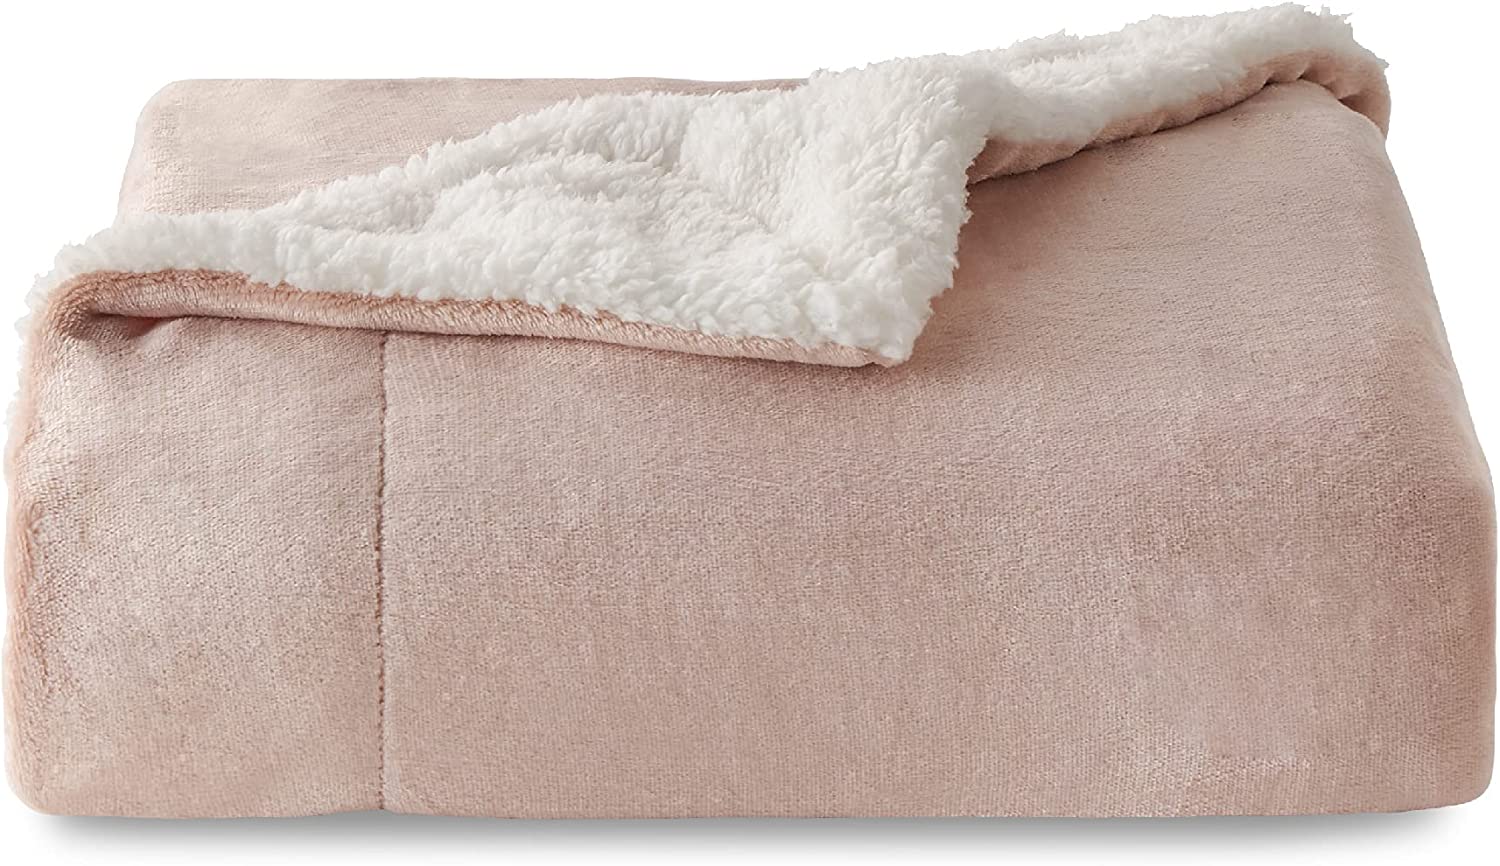 Sherpa Fleece Throw Blanket for Couch - Grey Thick Fuzzy Warm Soft Blankets and Throws for Sofa. 50x60 Inches